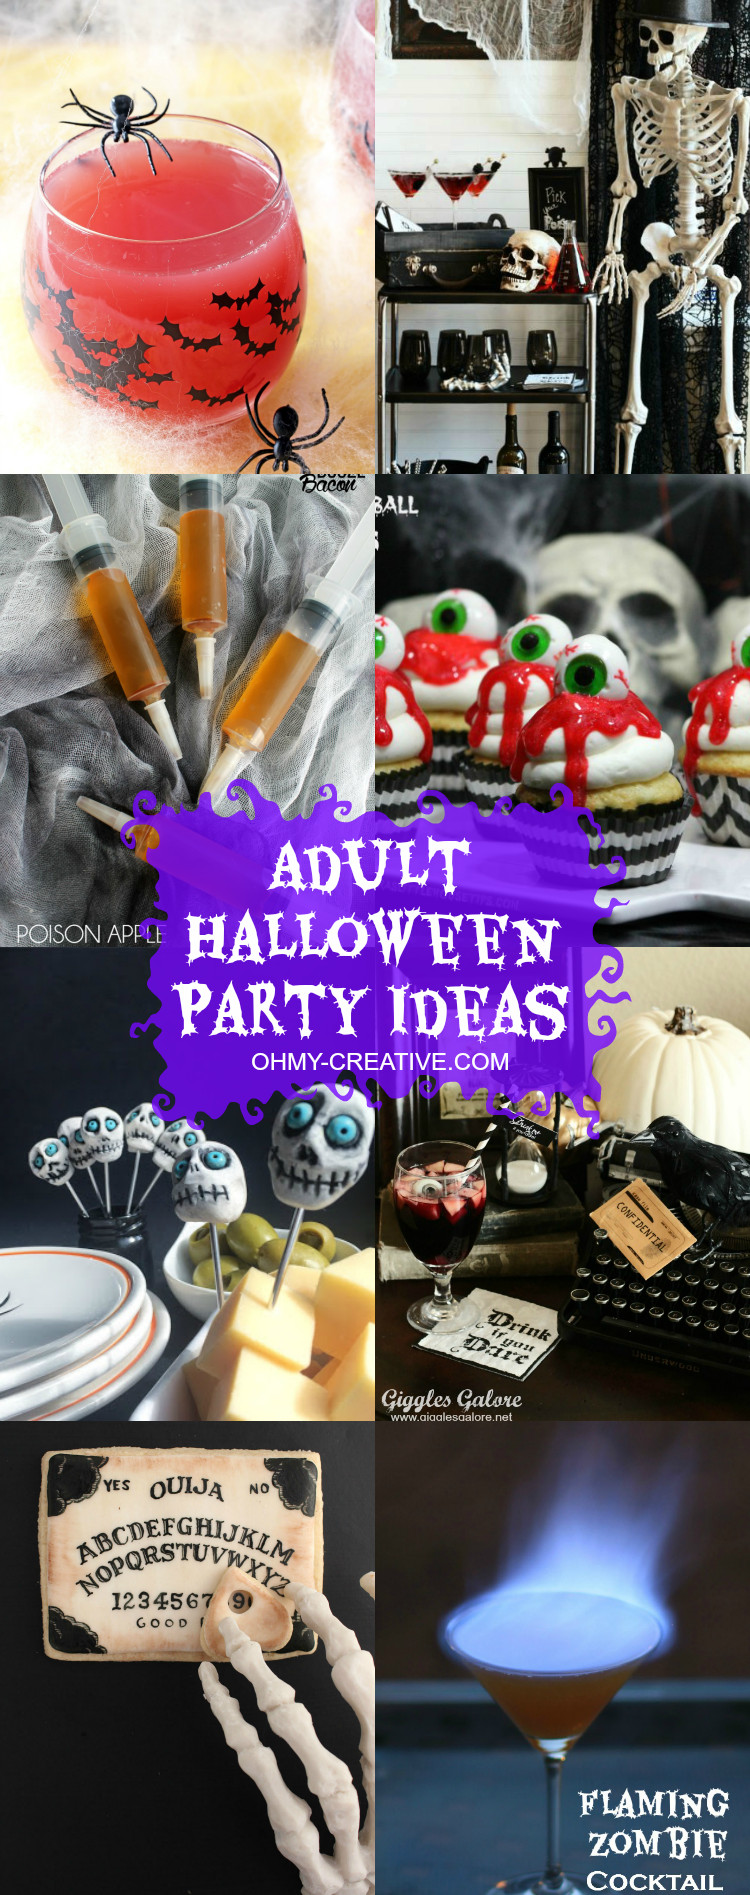 Halloween Party Ideas For Adults
 Adult Halloween Party Ideas Oh My Creative